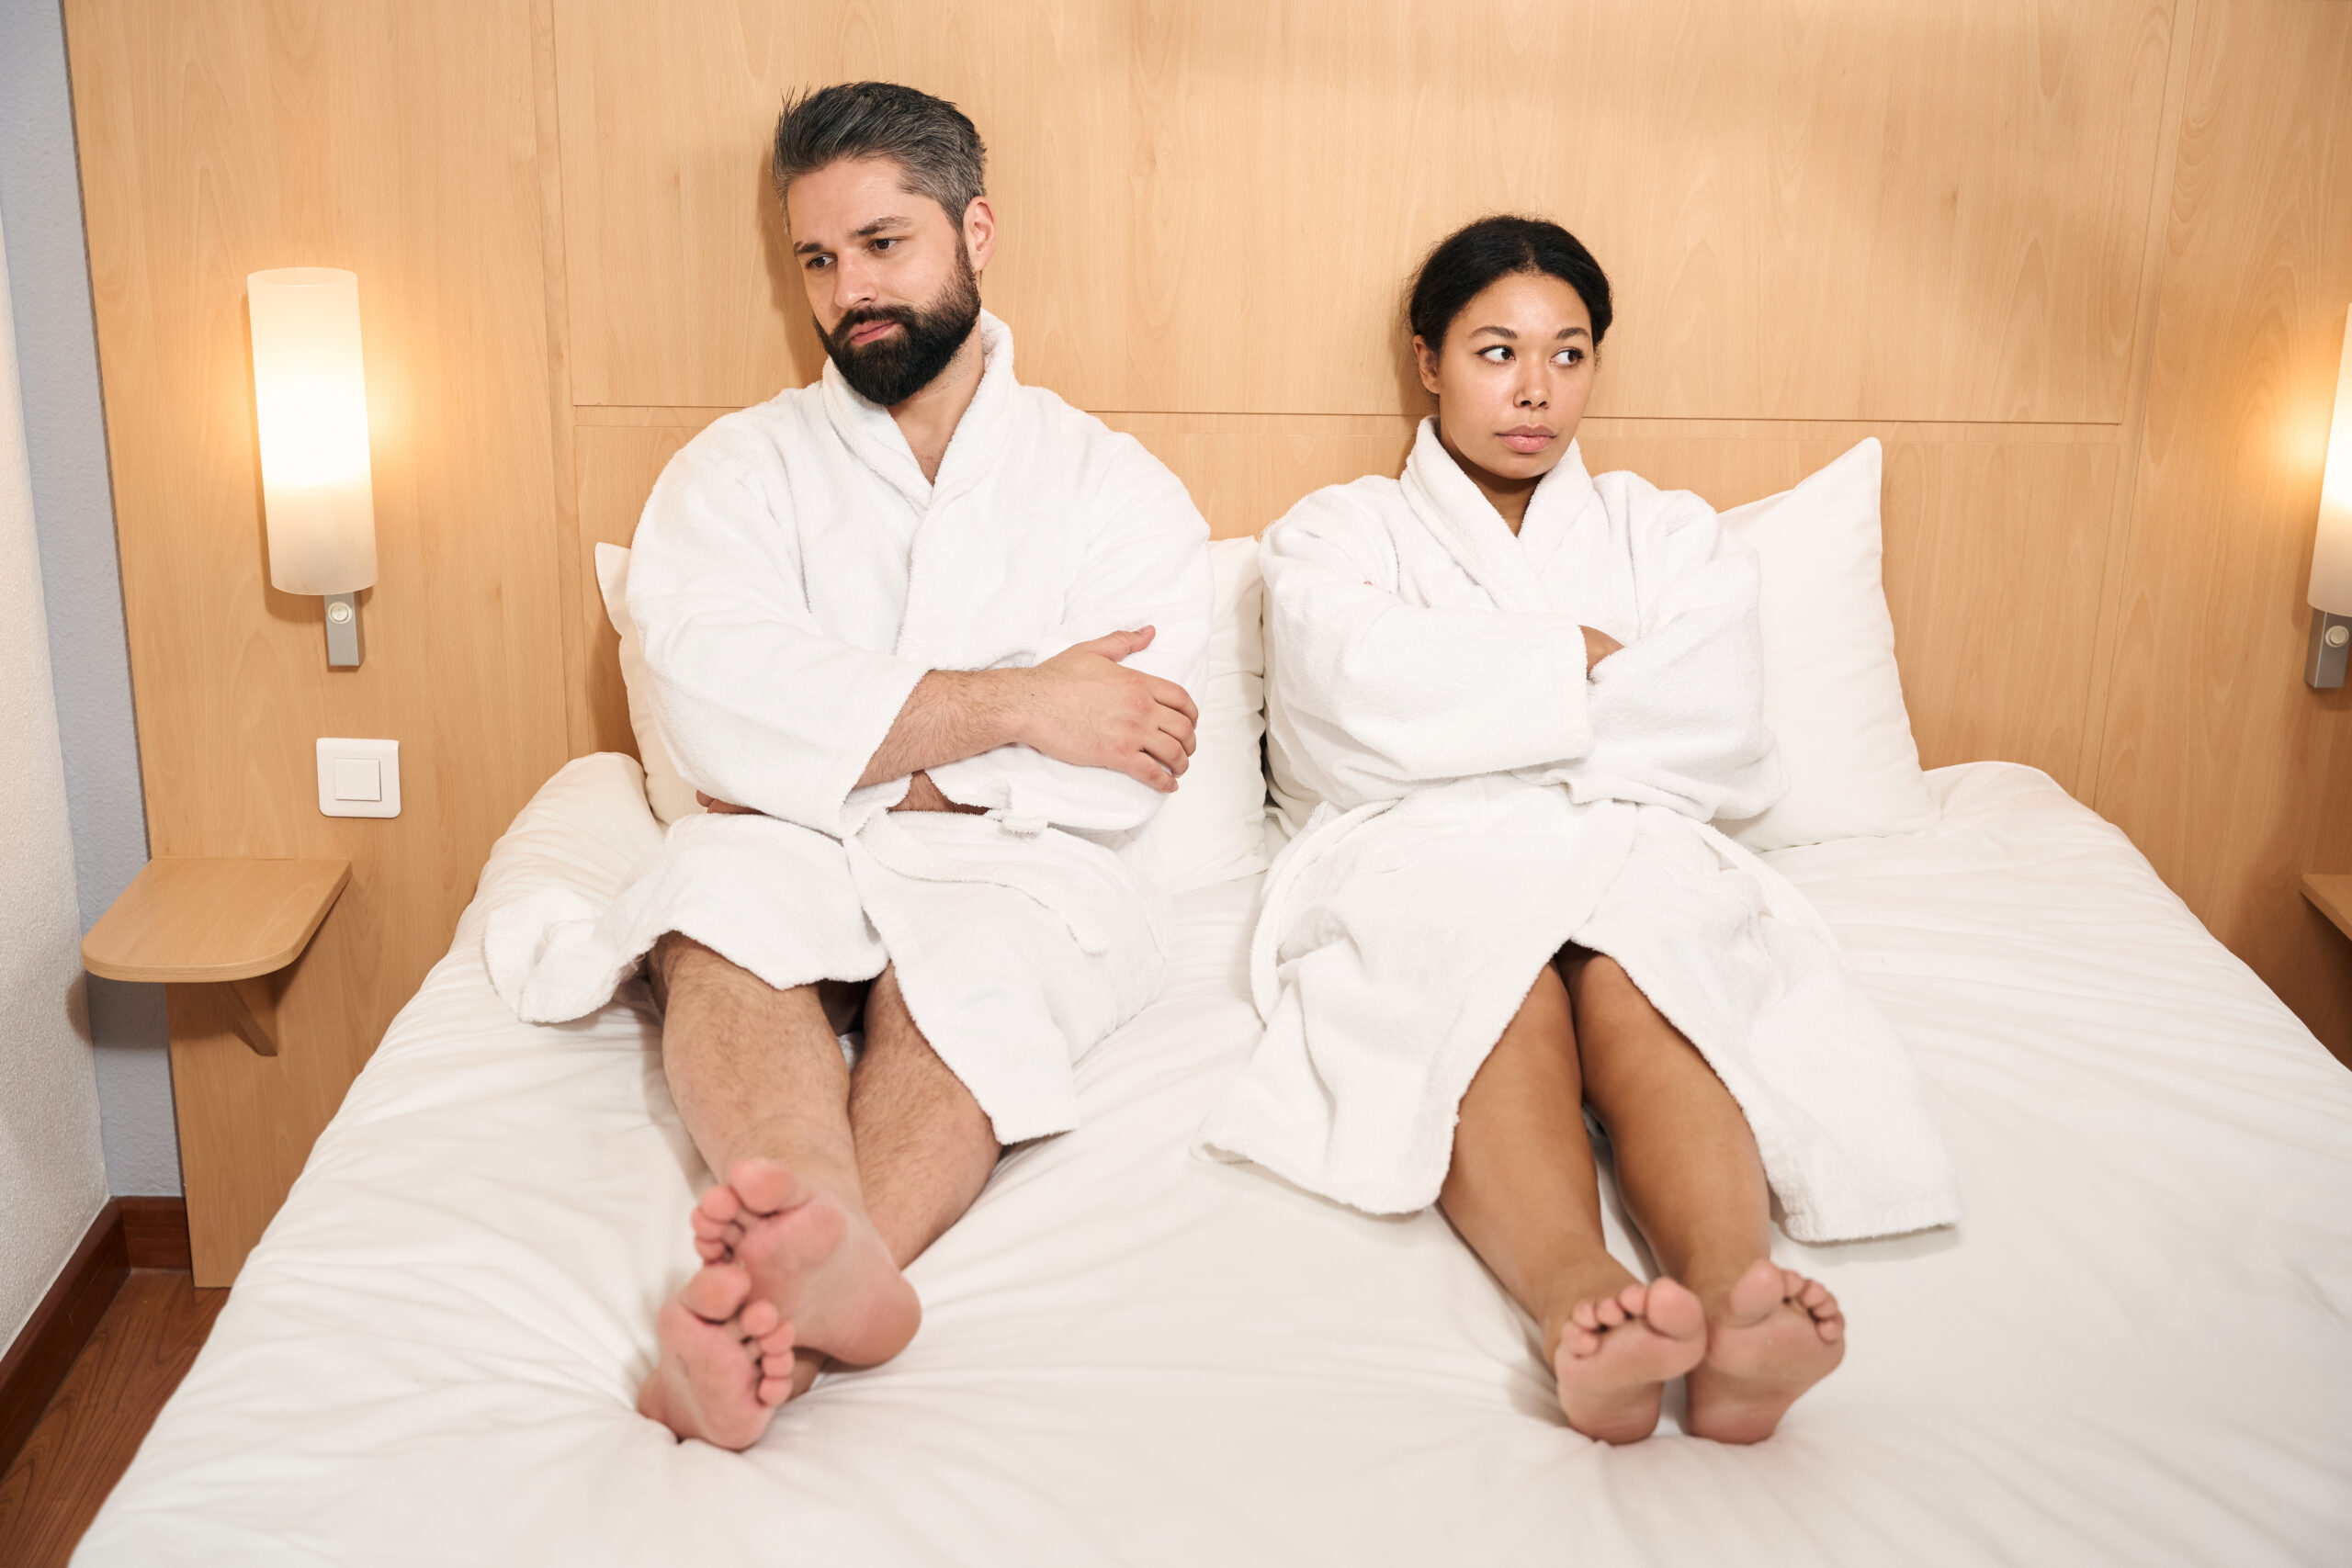 Low-spirited man and his despondent female companion seated in bed looking in different directions